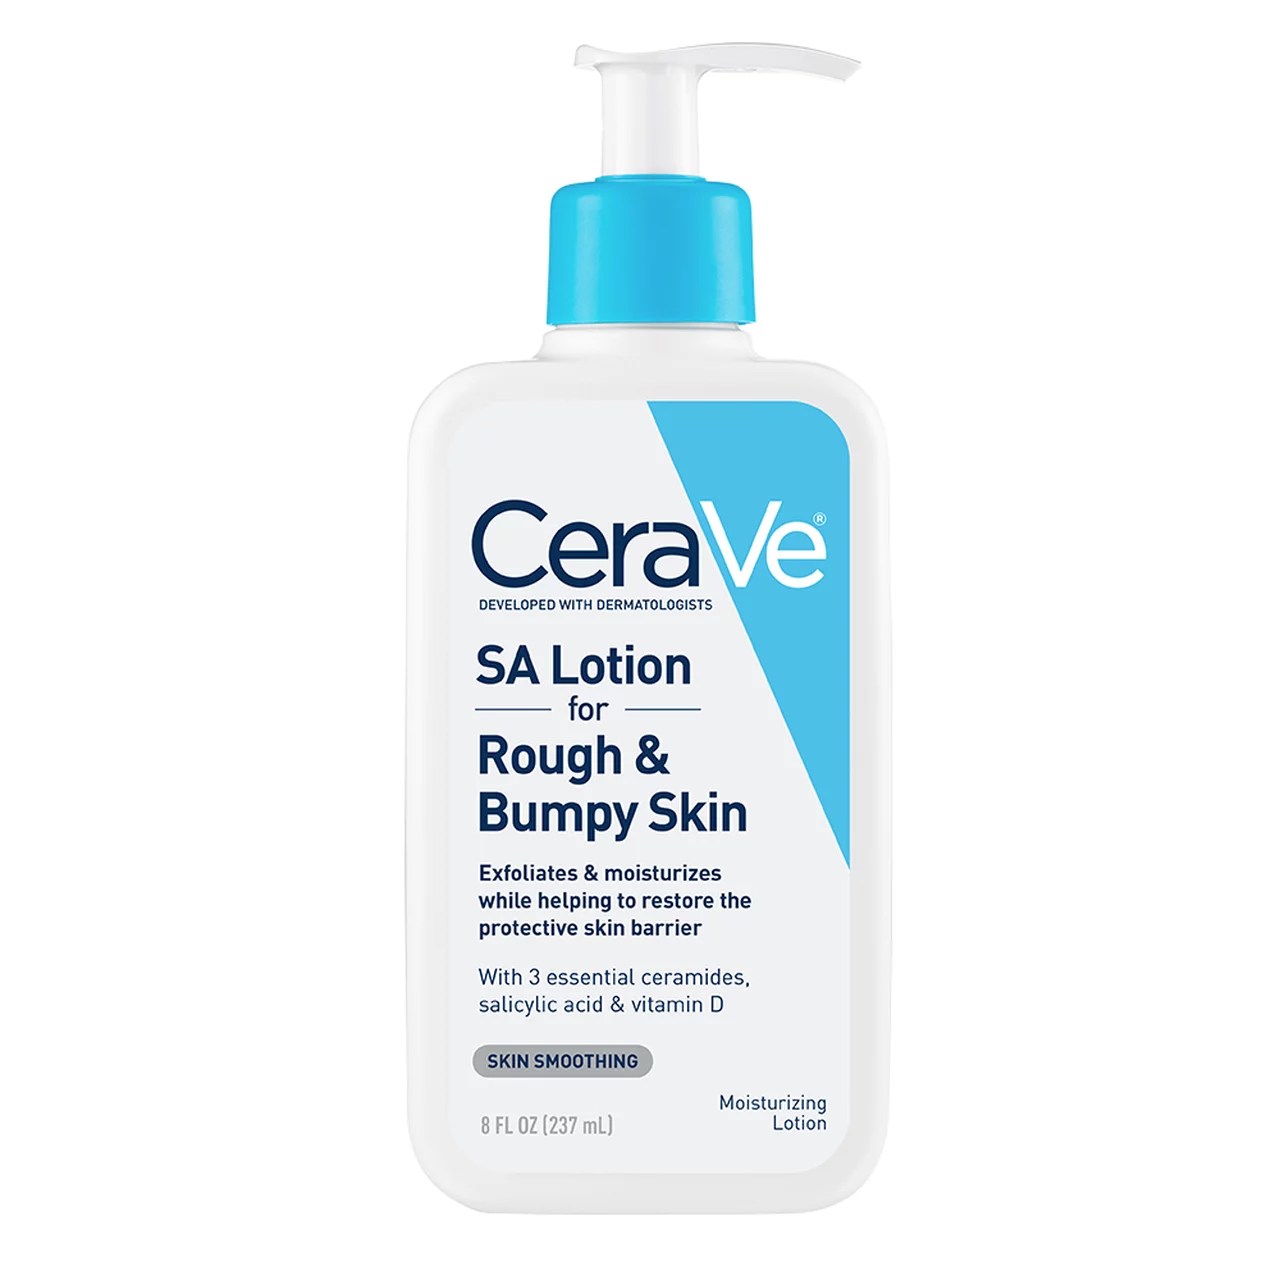 CeraVe Salicylic Acid Lotion for Rough and Bumpy Skin, dermatologist favorite psoriasis products